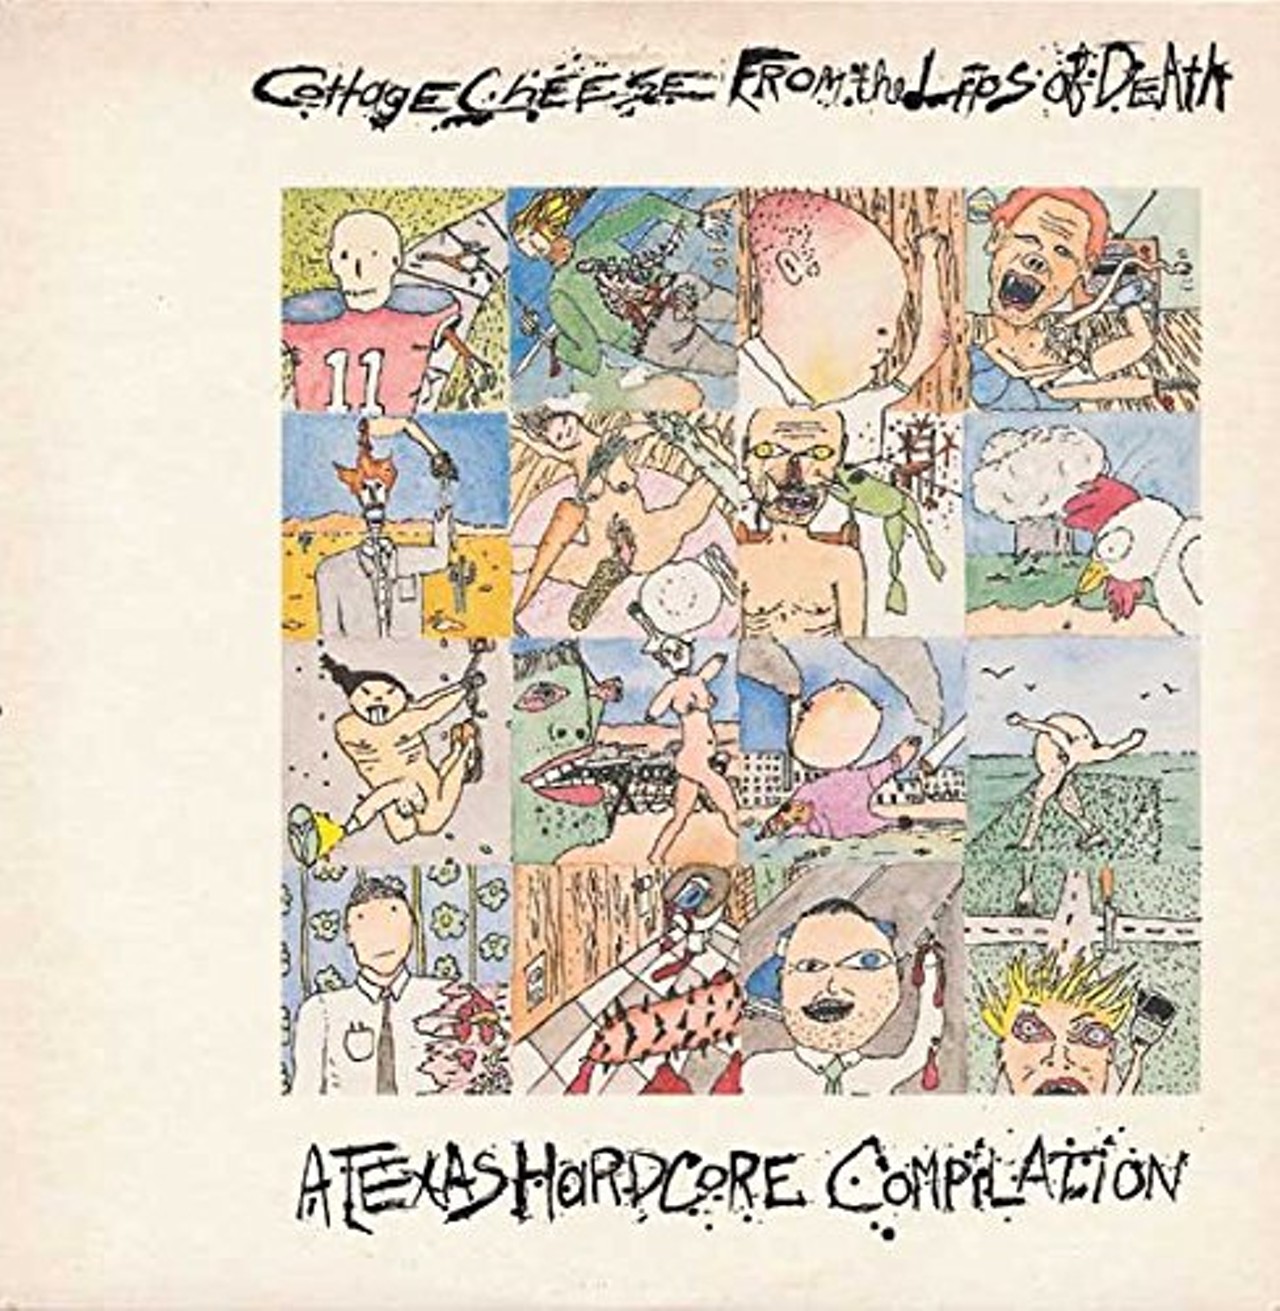 Various Artists: "Cottage Cheese From the Lips of Death: A Texas Hardcore Compilation"
Recorded as a round-robin affair at Bob O'Neil Sound Studios on Broadway, this compilation album documents the sonic ferocity that embodied Texas' punk scene circa 1983. With tracks by DRI, the Marching Plague, the Dicks, the Butthole Surfers, the Mydolls and more, this out-of-print album includes a veritable Who's Who of that singularly creative era.
Photo via Ward 9 Records